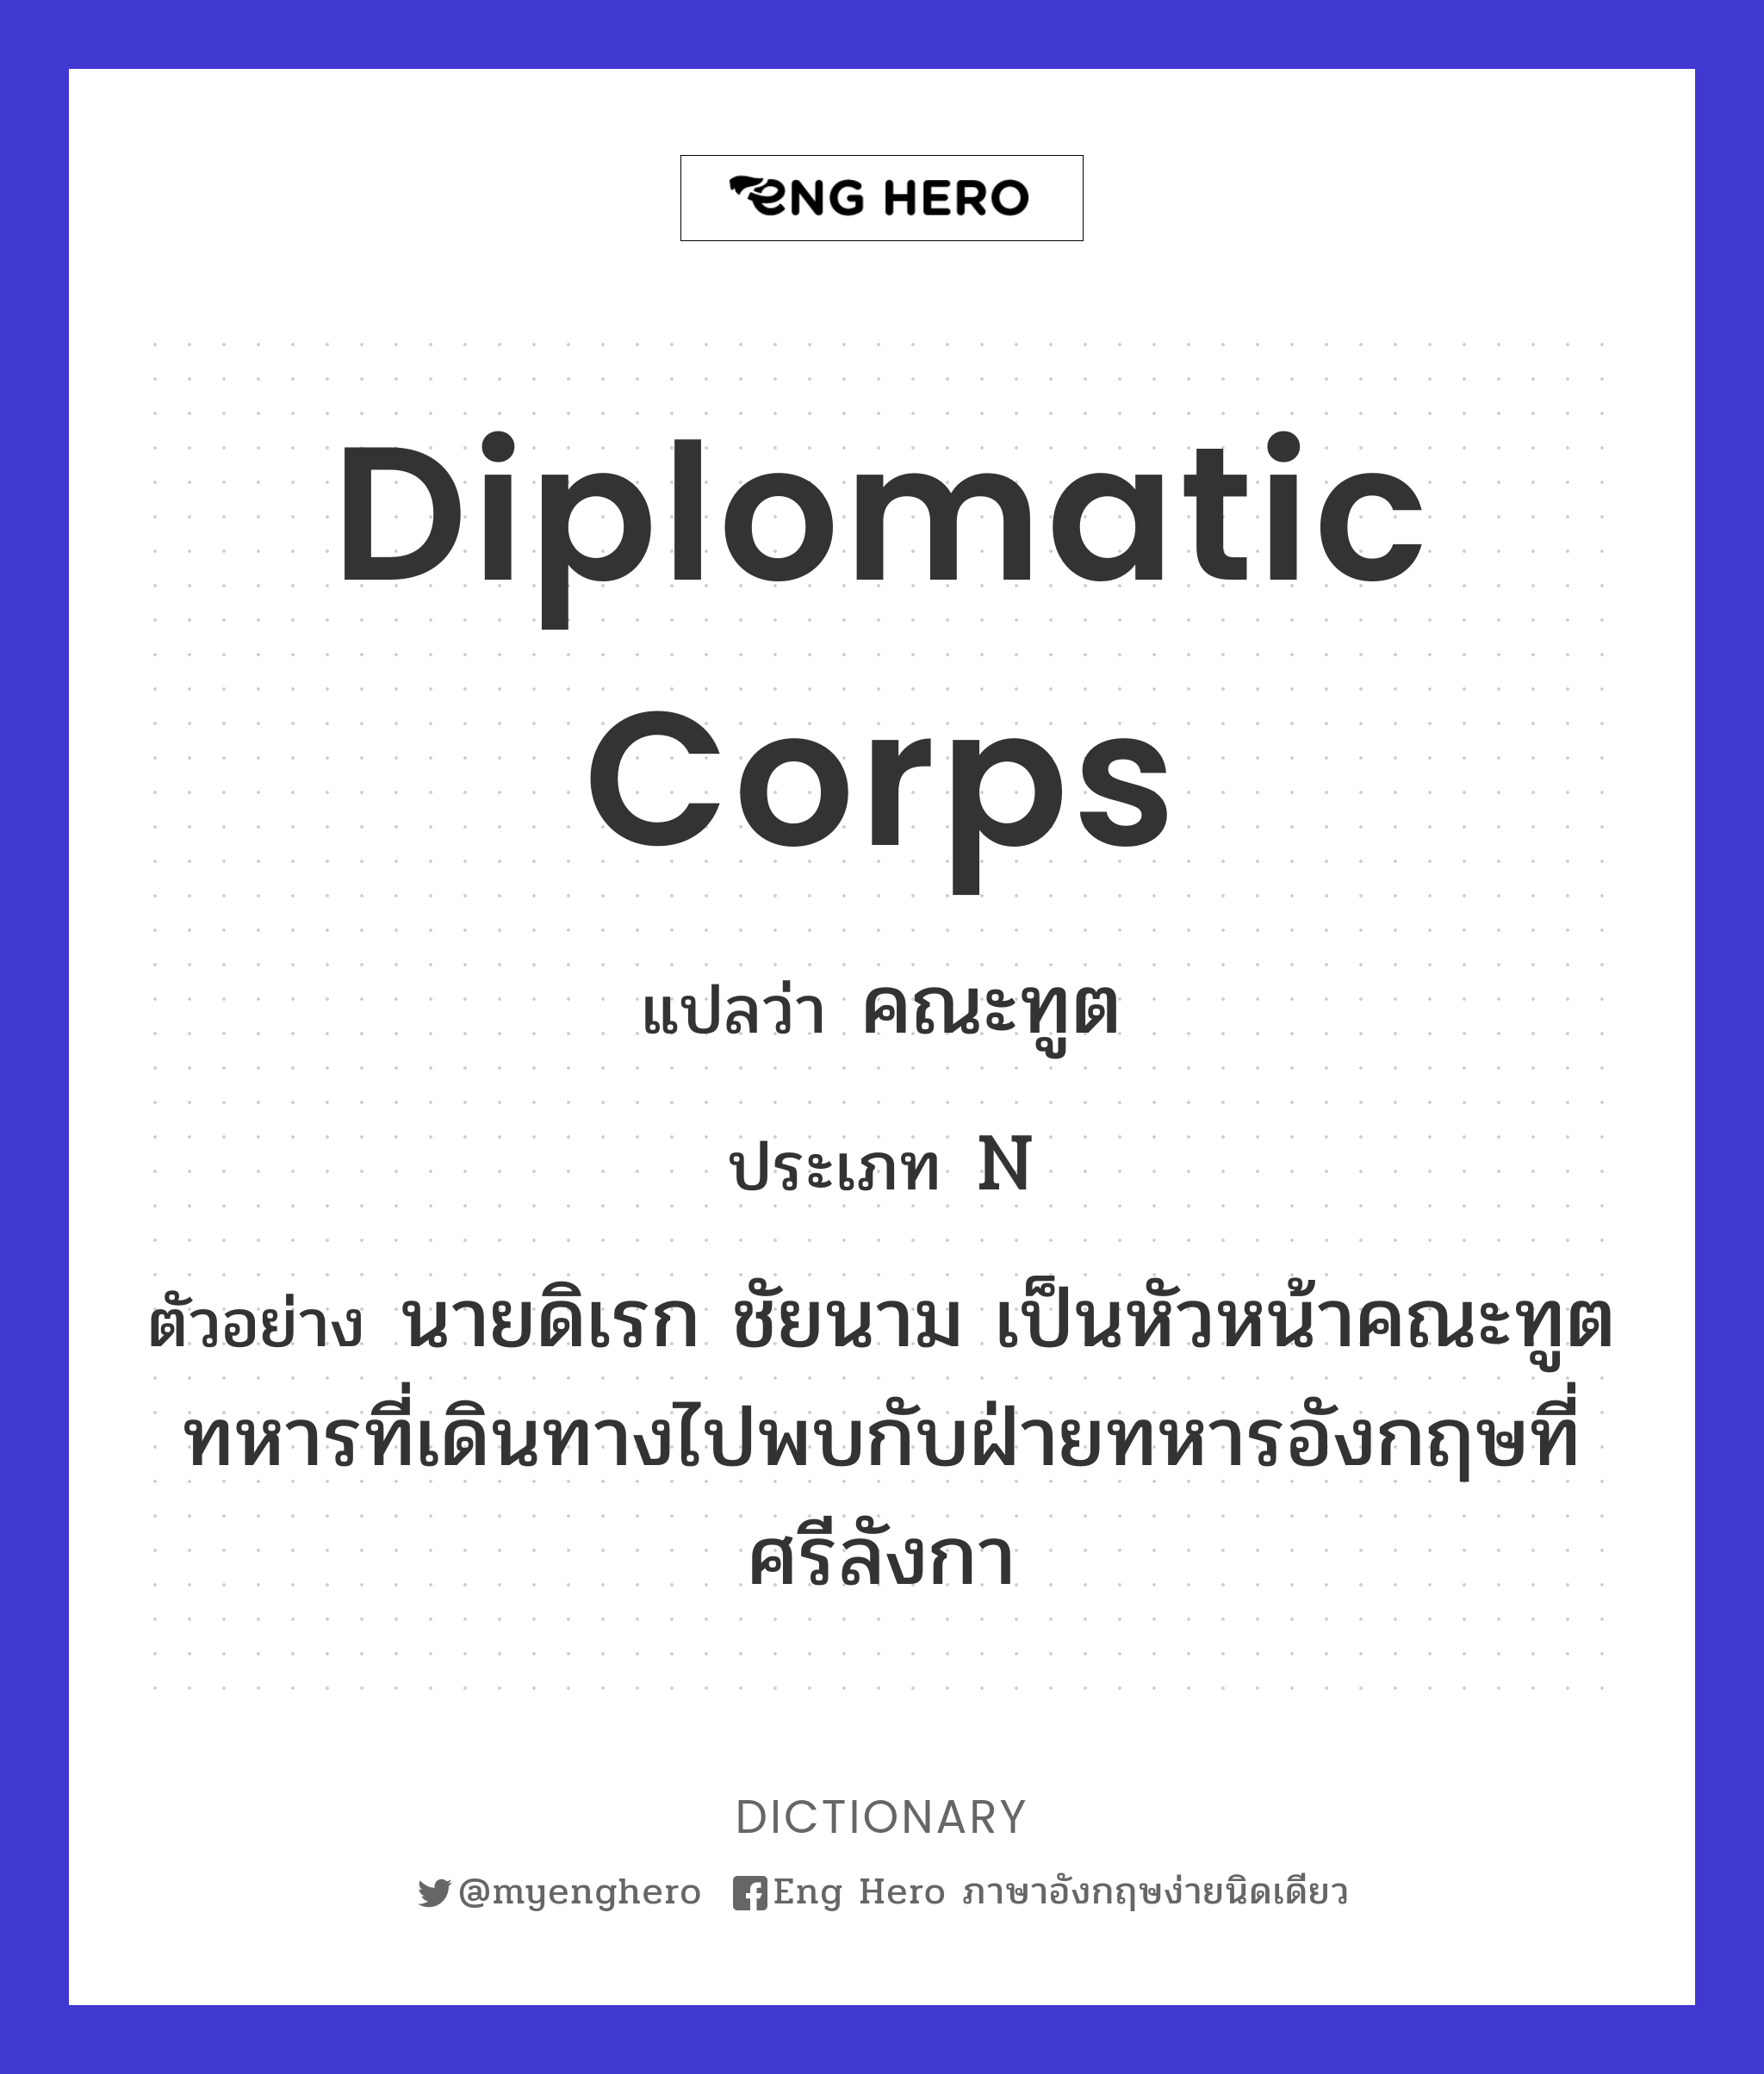 diplomatic corps